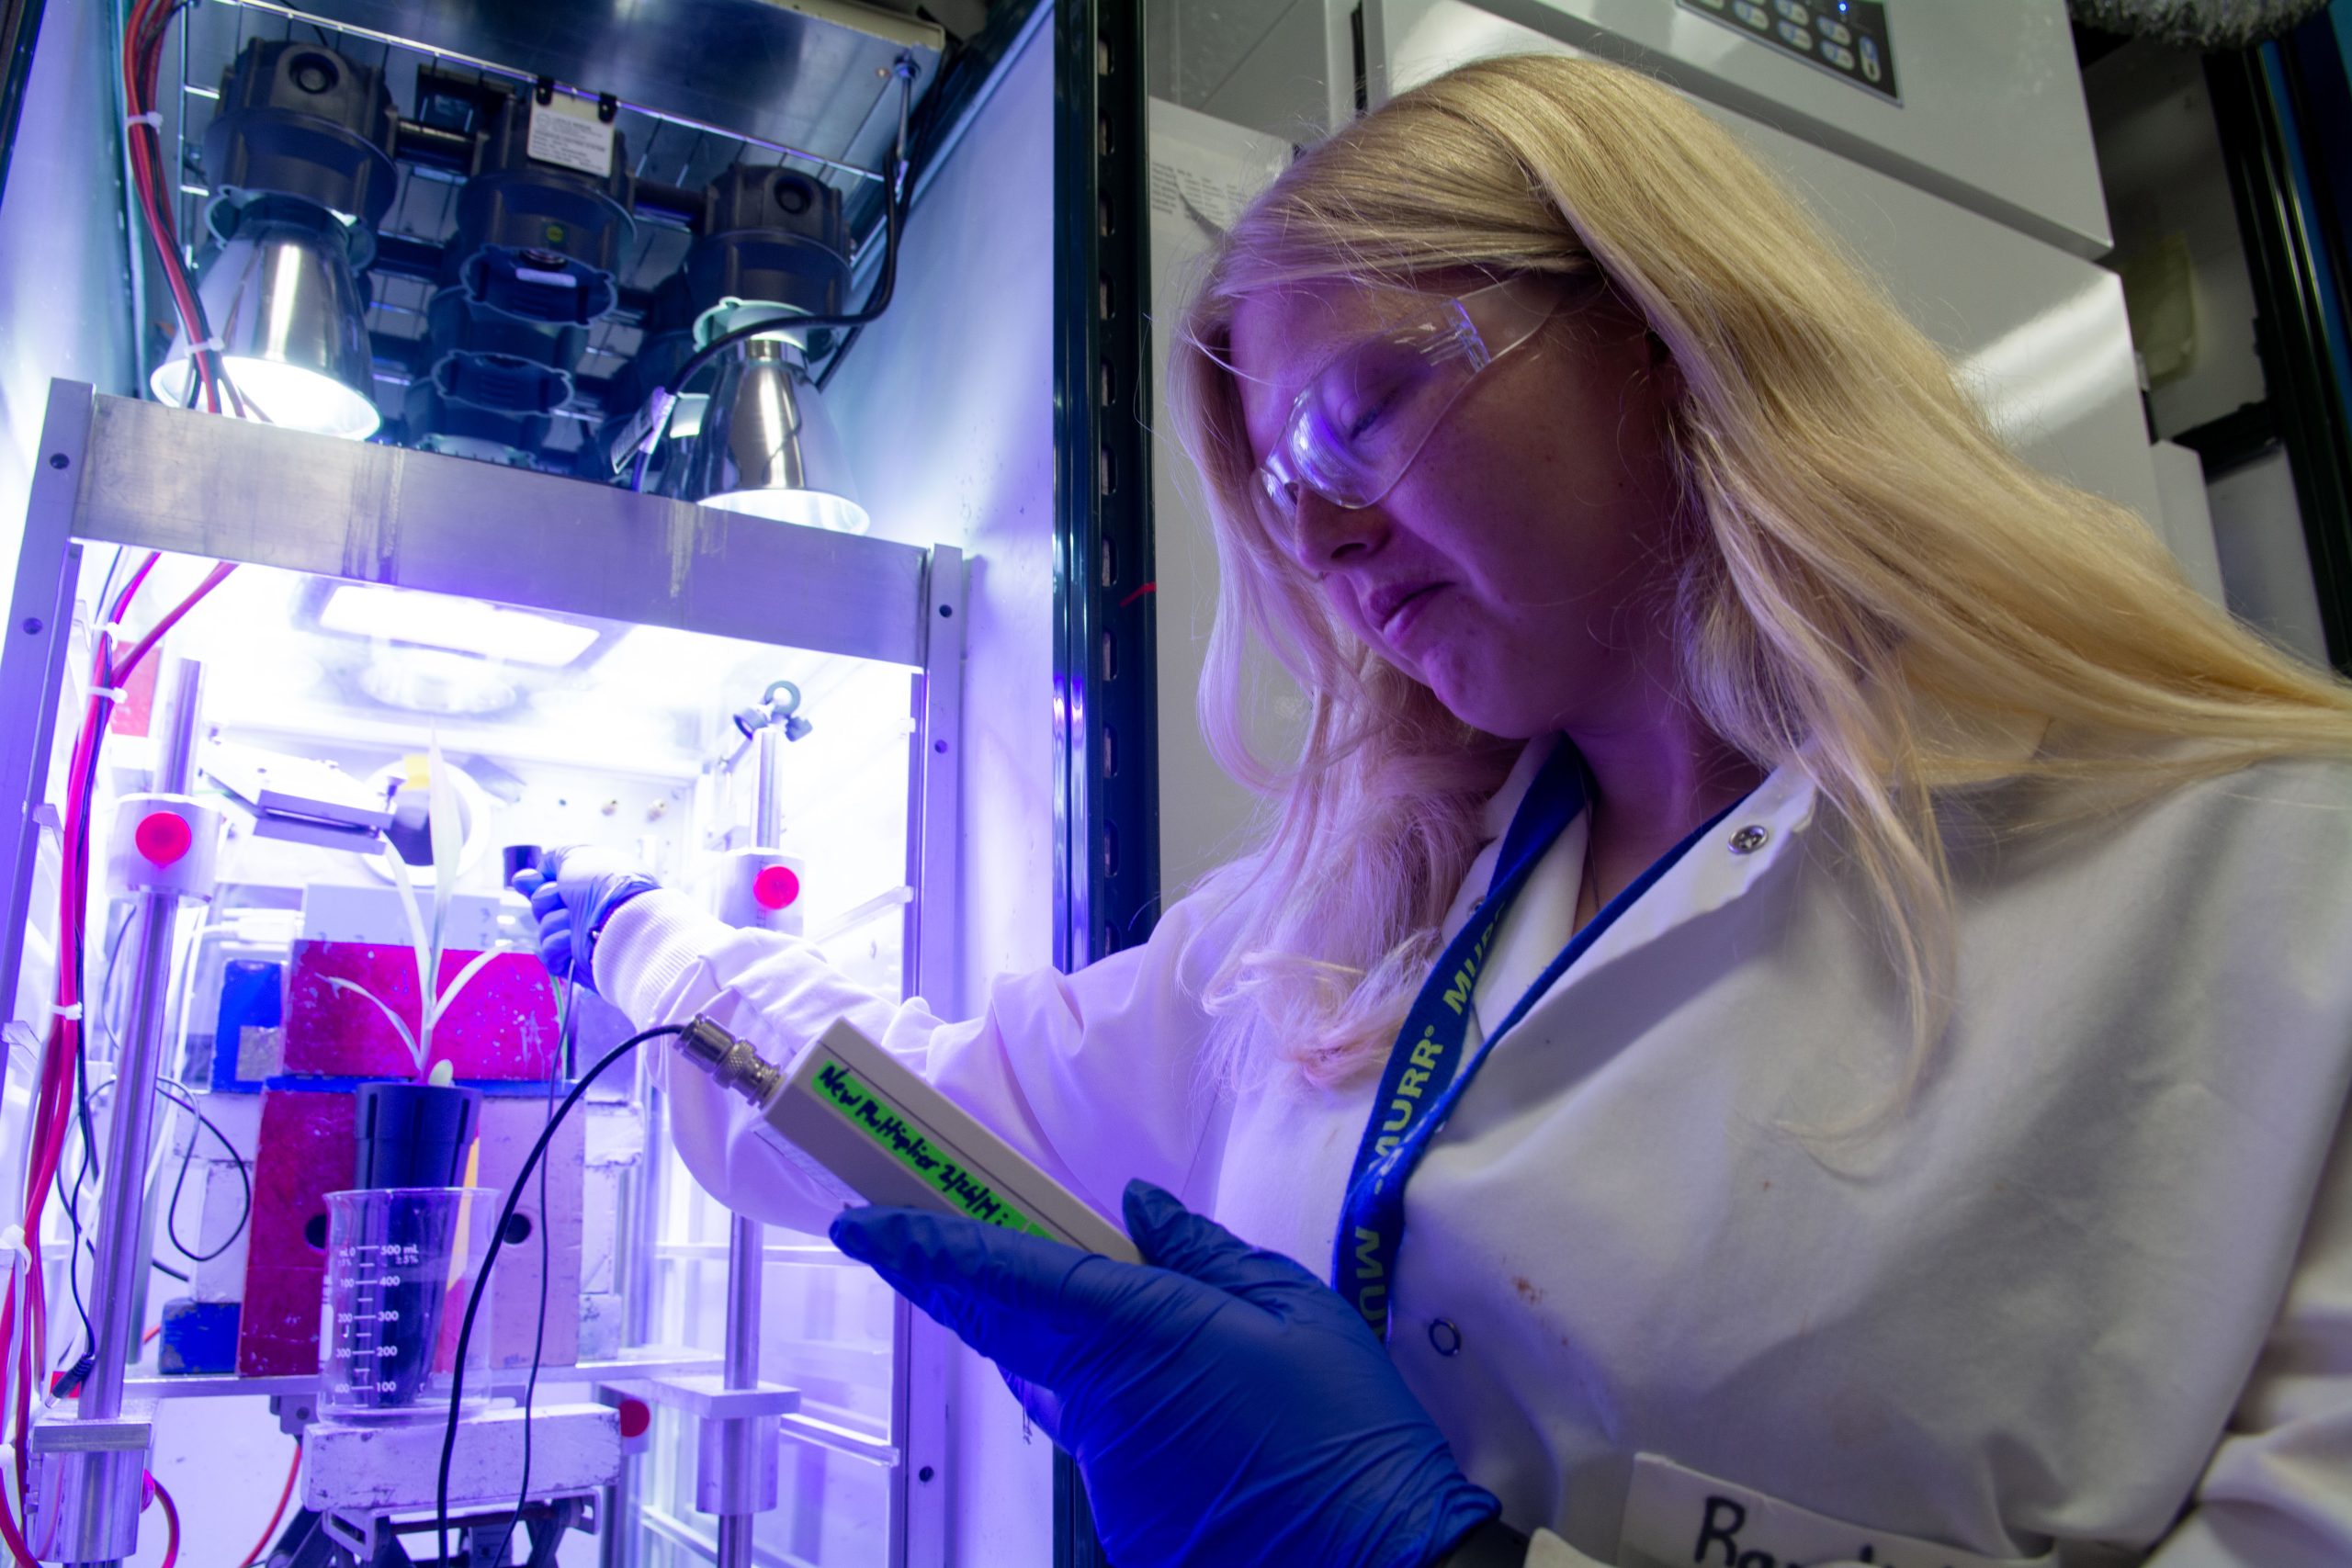 a woman checks a scientific instrument in front of a plant growing in a box in a scientific lab